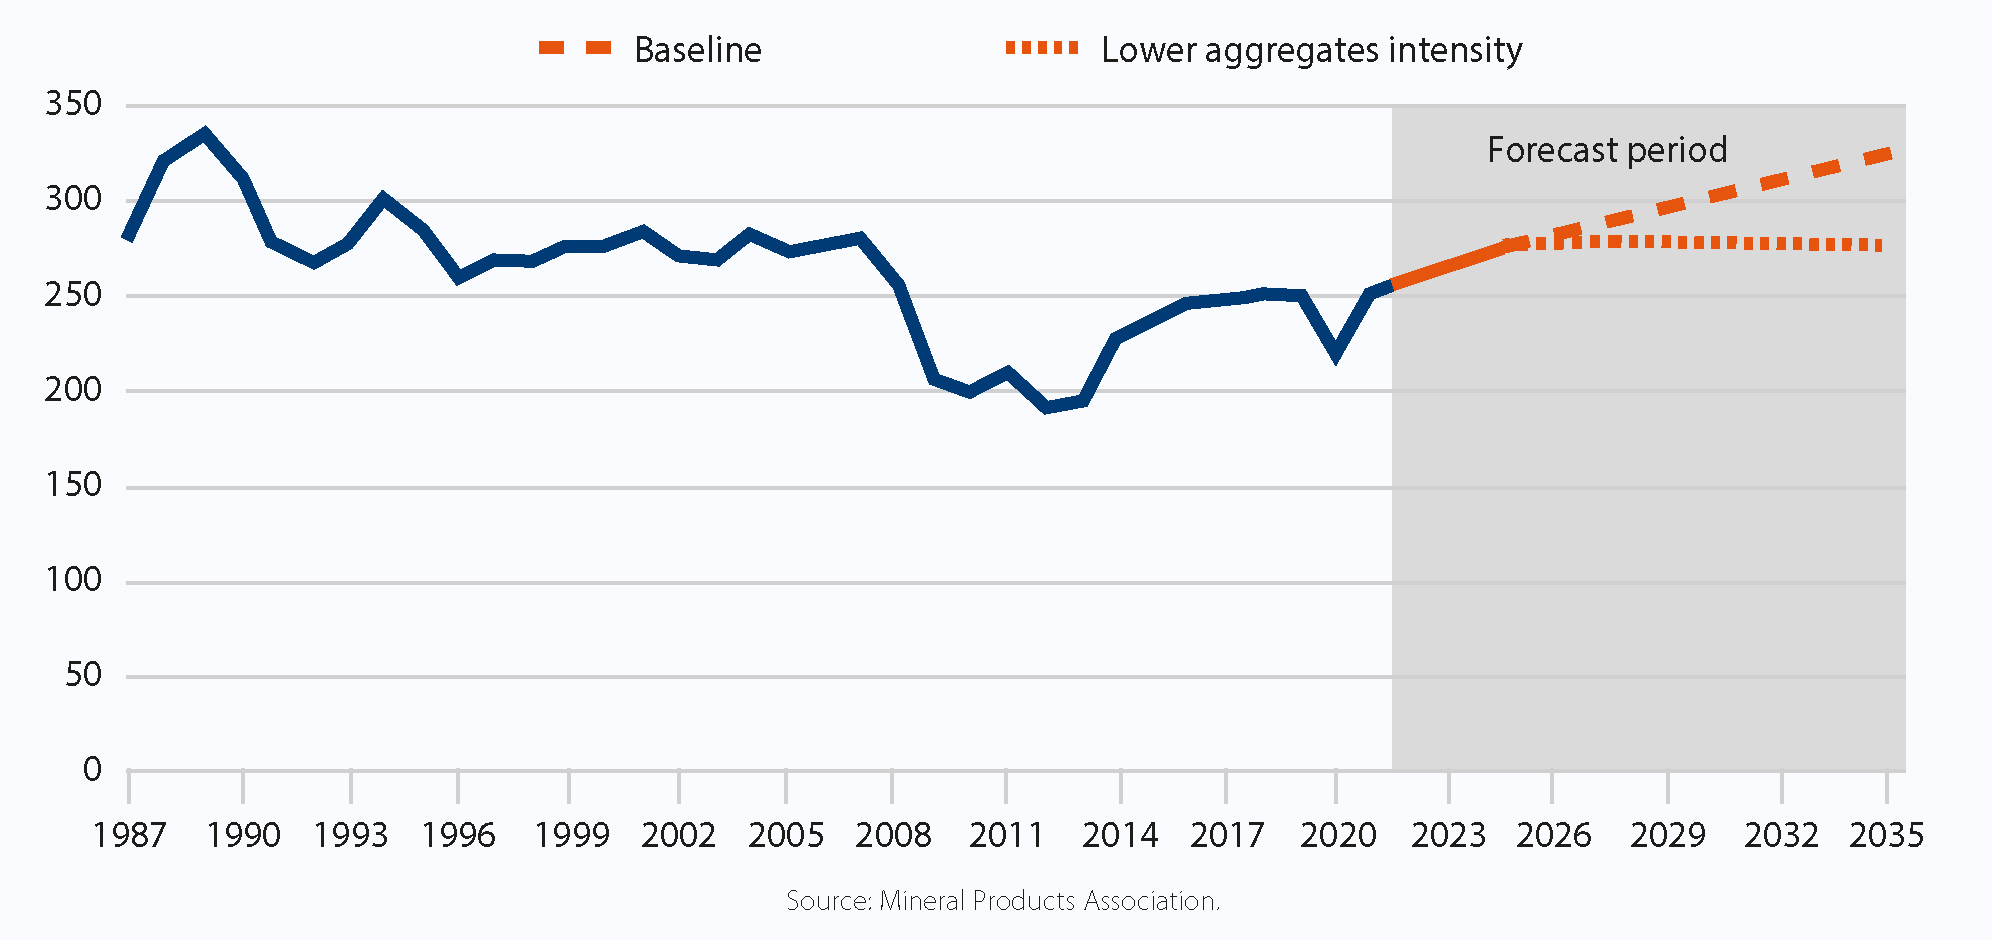 Total aggregates demand in Great Britain: 2022-35 projections under the baseline and lower aggregates intensity assumptions (million tonnes). Source: MPA